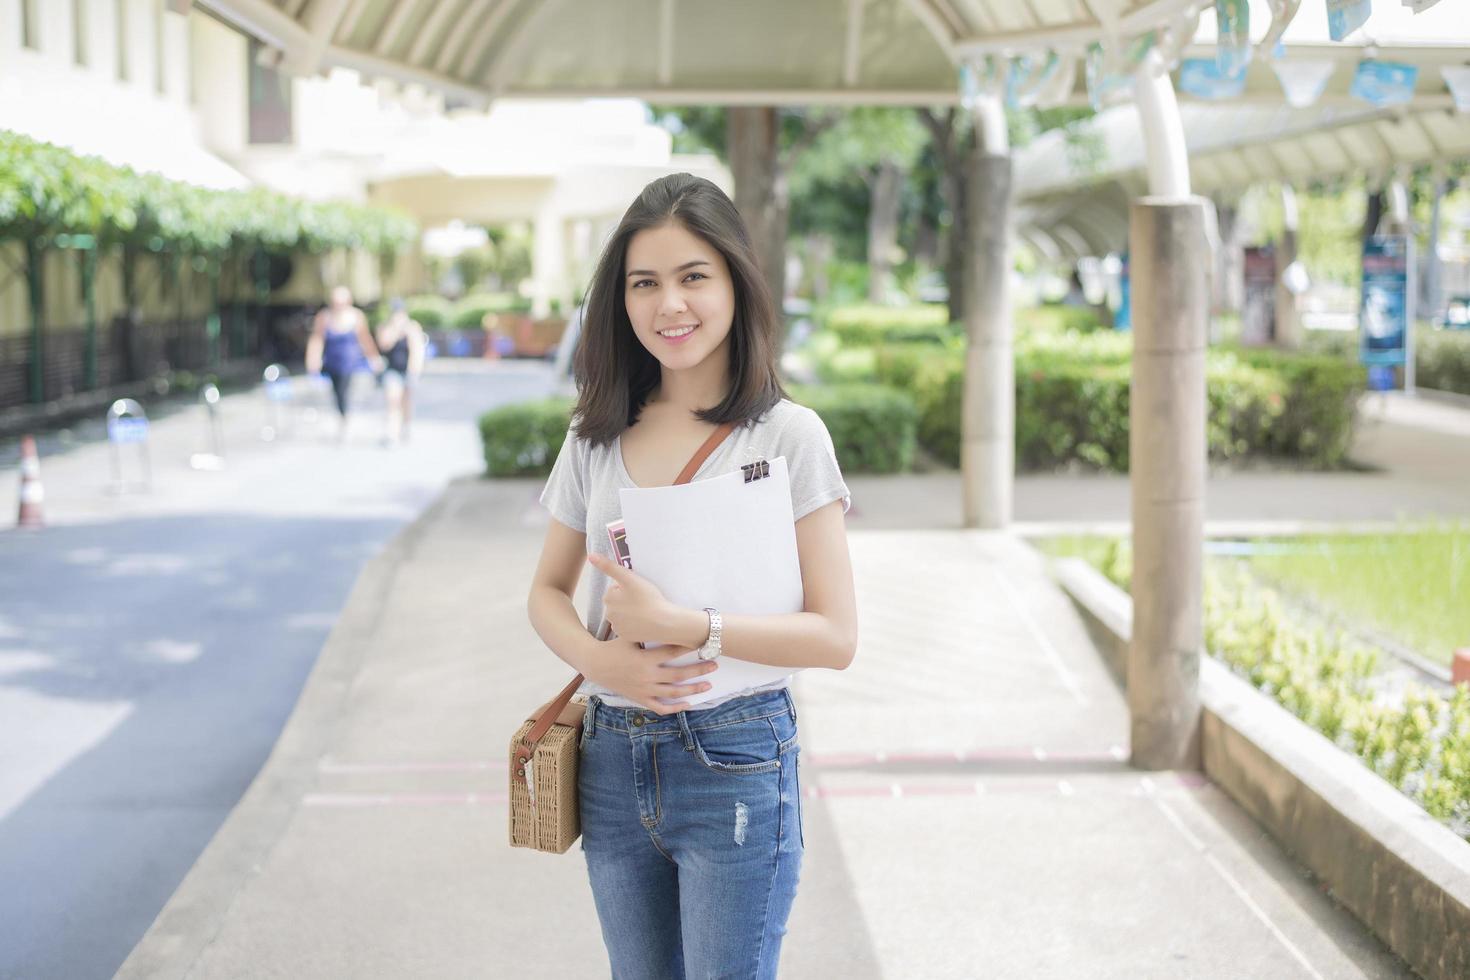 A portrait of an Asian university student on campus photo